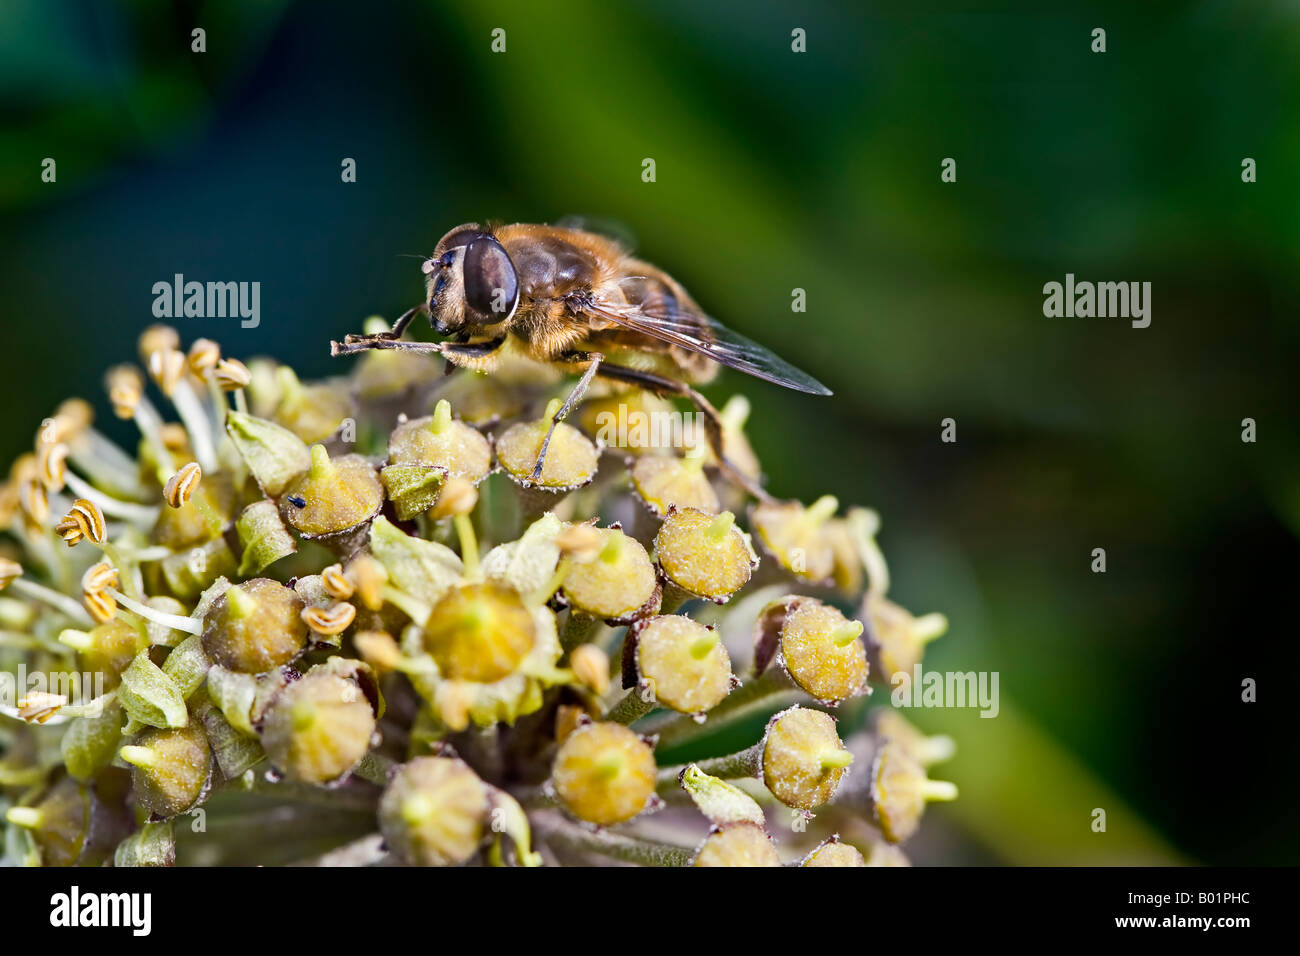 Hoverfly, Syrphid fly, on ivy flower November Stock Photo